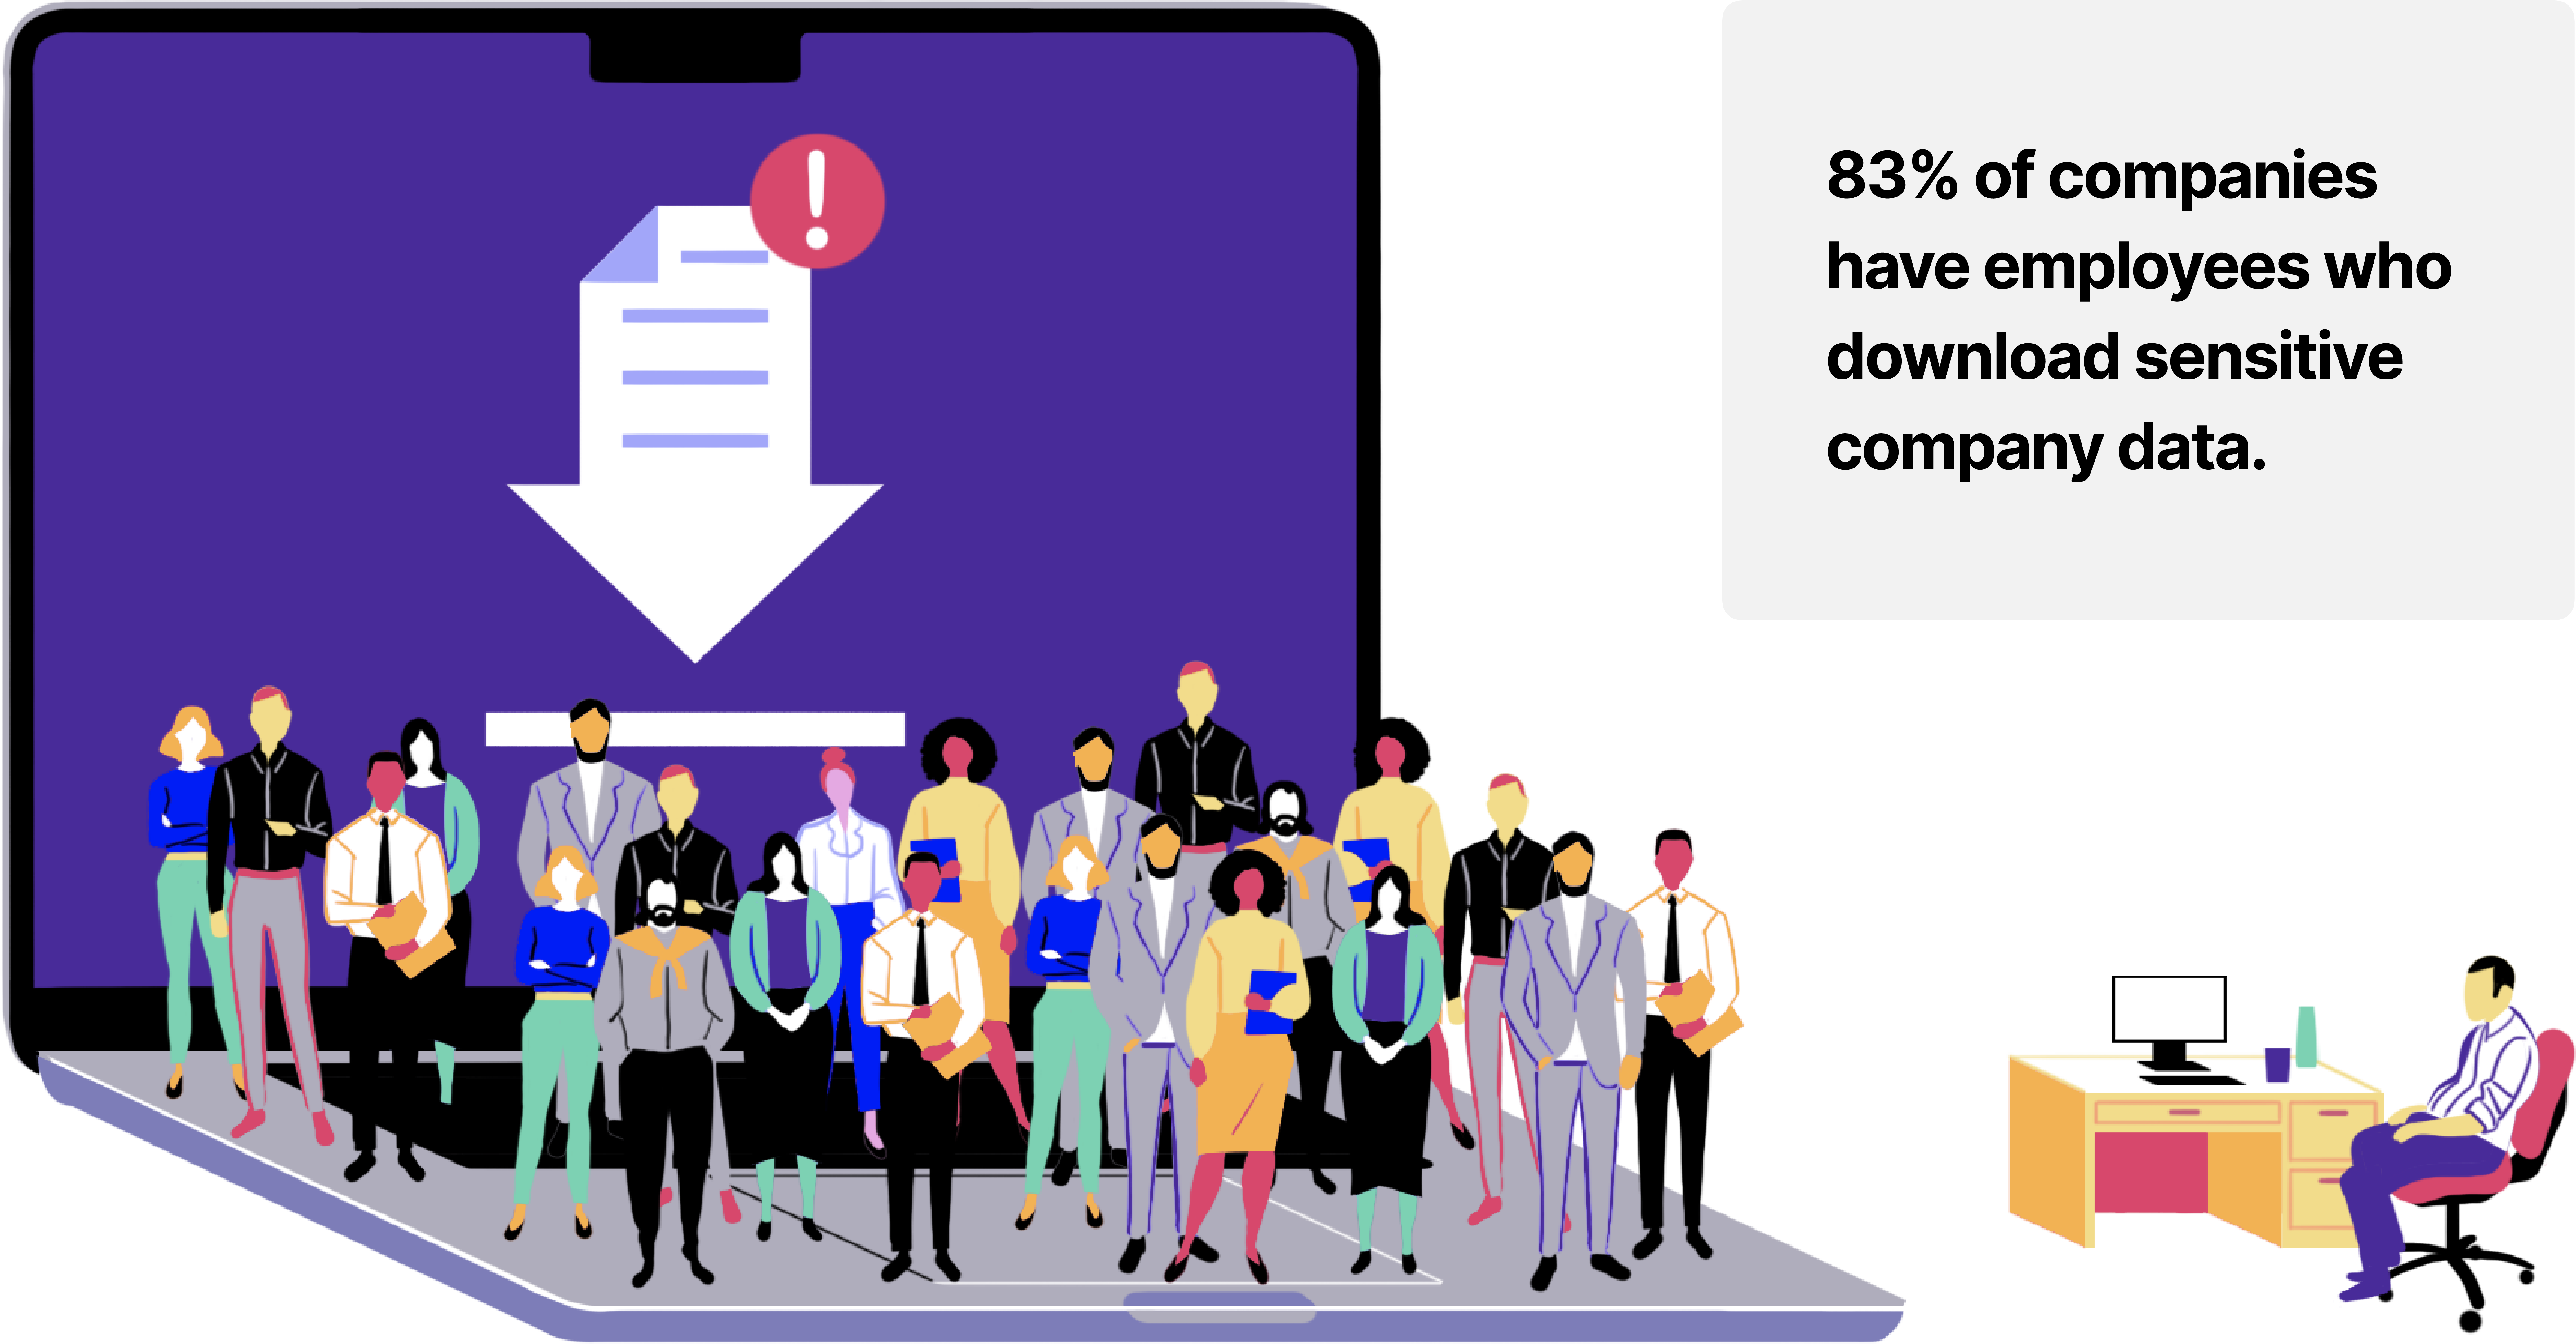 An infographic with a larger than life laptop and a group of people standing on top of the keyboard with a statistic stating: 83% of companies have employees who download sensitive company data.